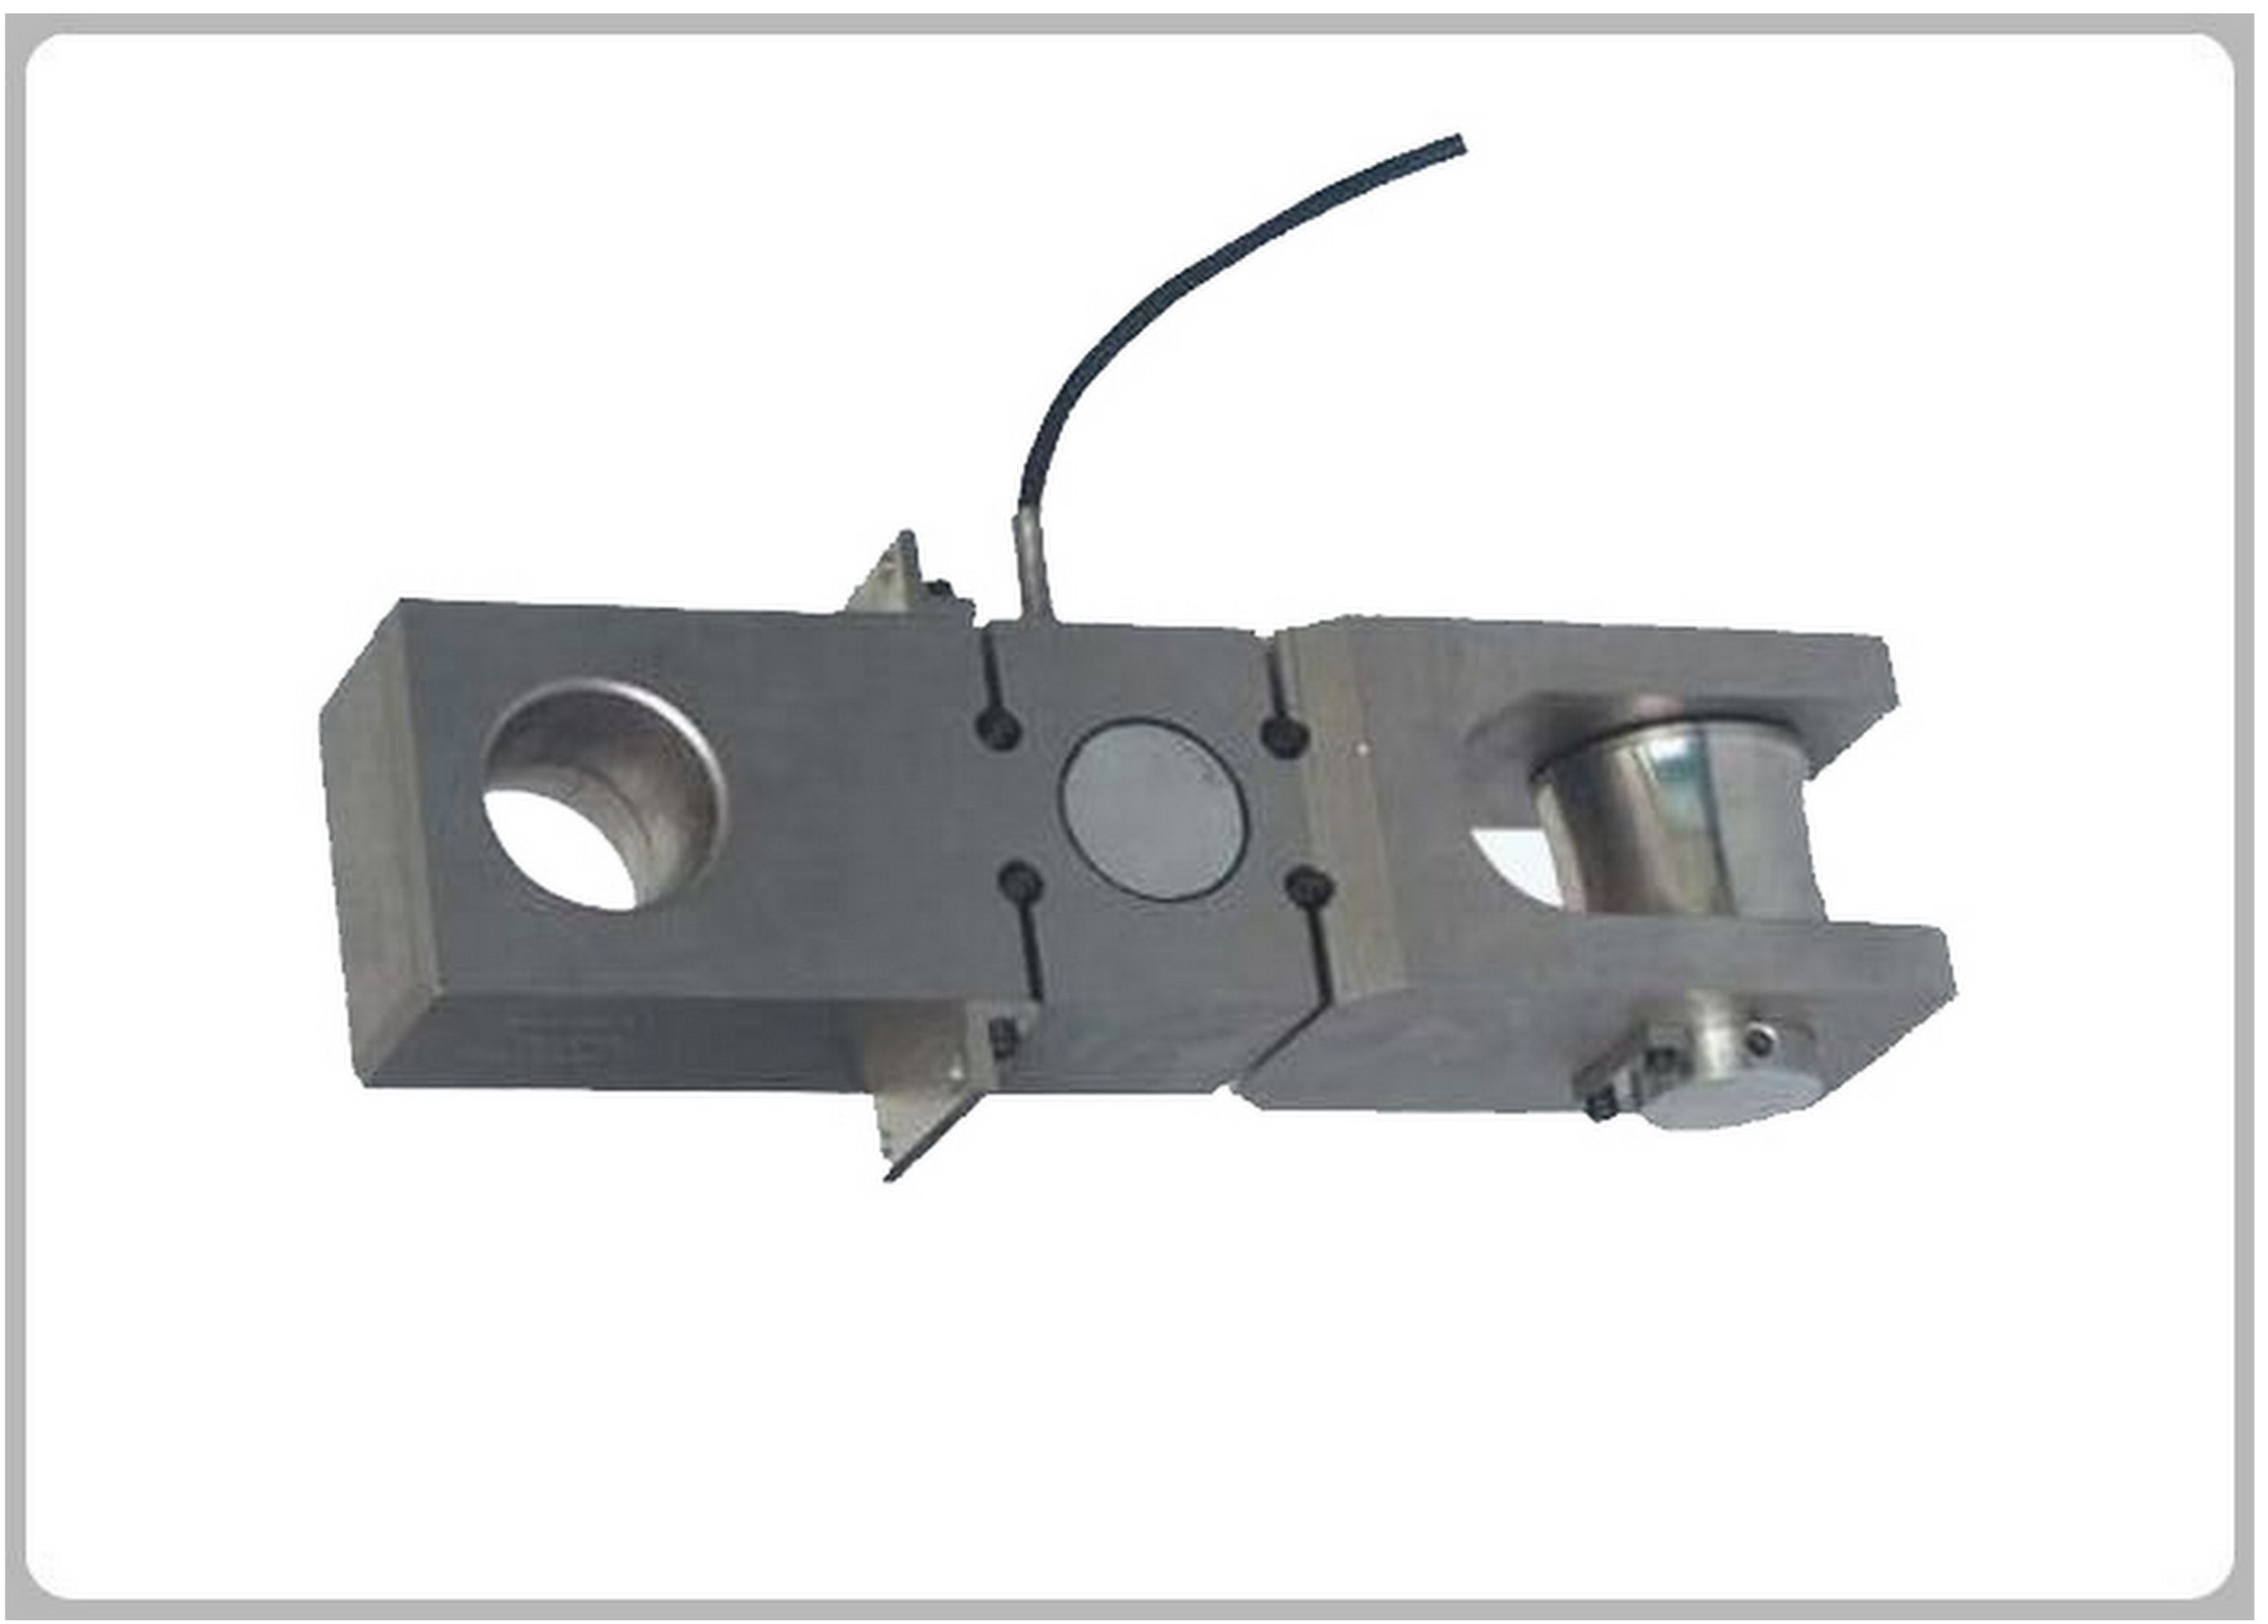 MC8302 LOAD CELL & FORCE TRANSDUCER